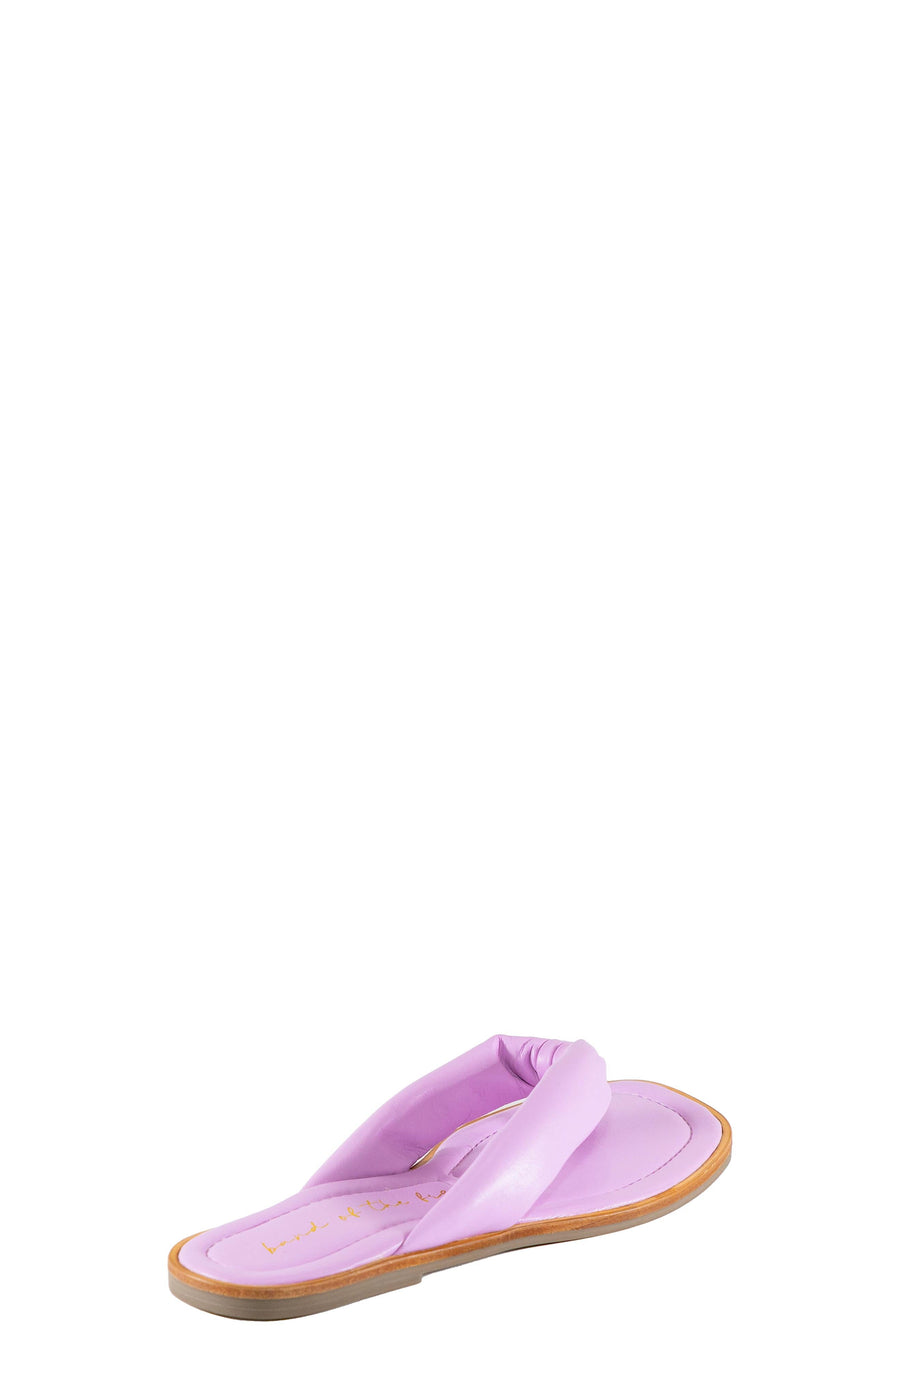 Solana Lilac Leather Padded Flip Flop